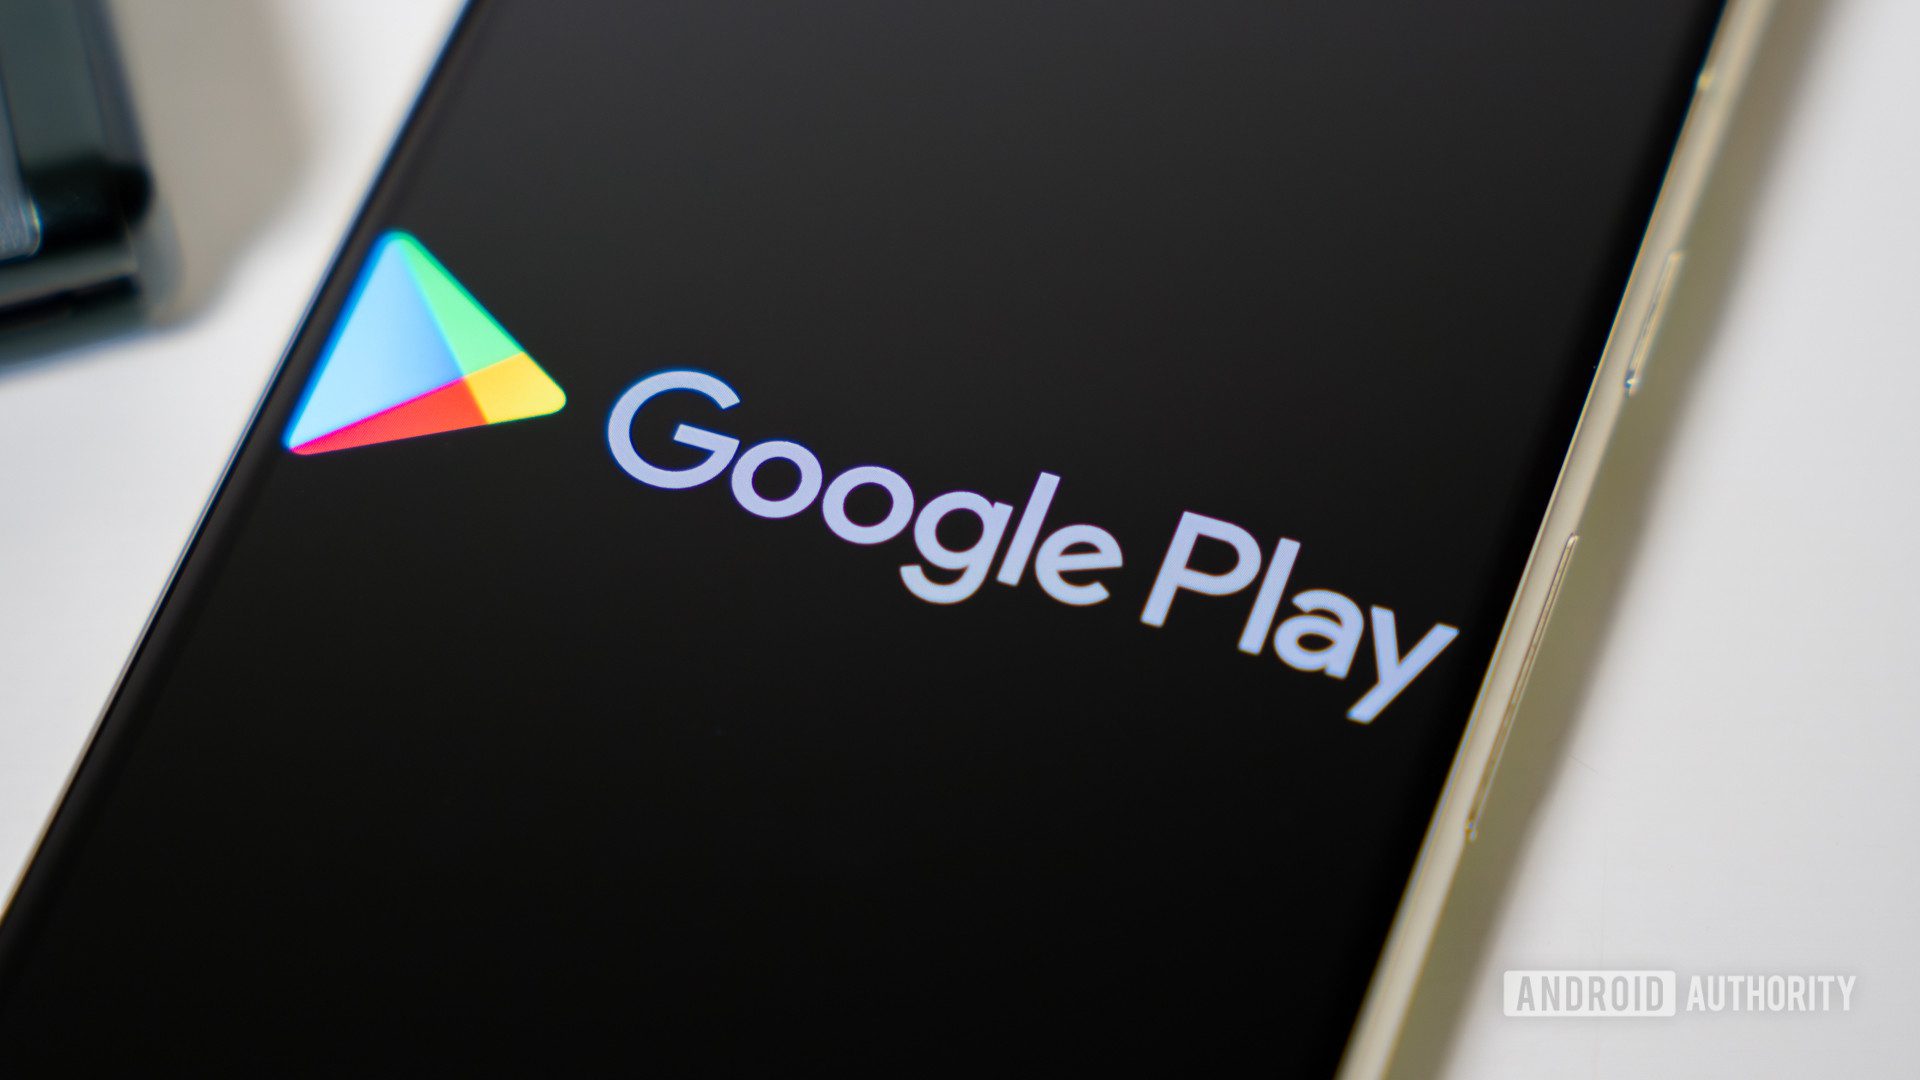 Finally, the Play Store allows you to download two applications at once